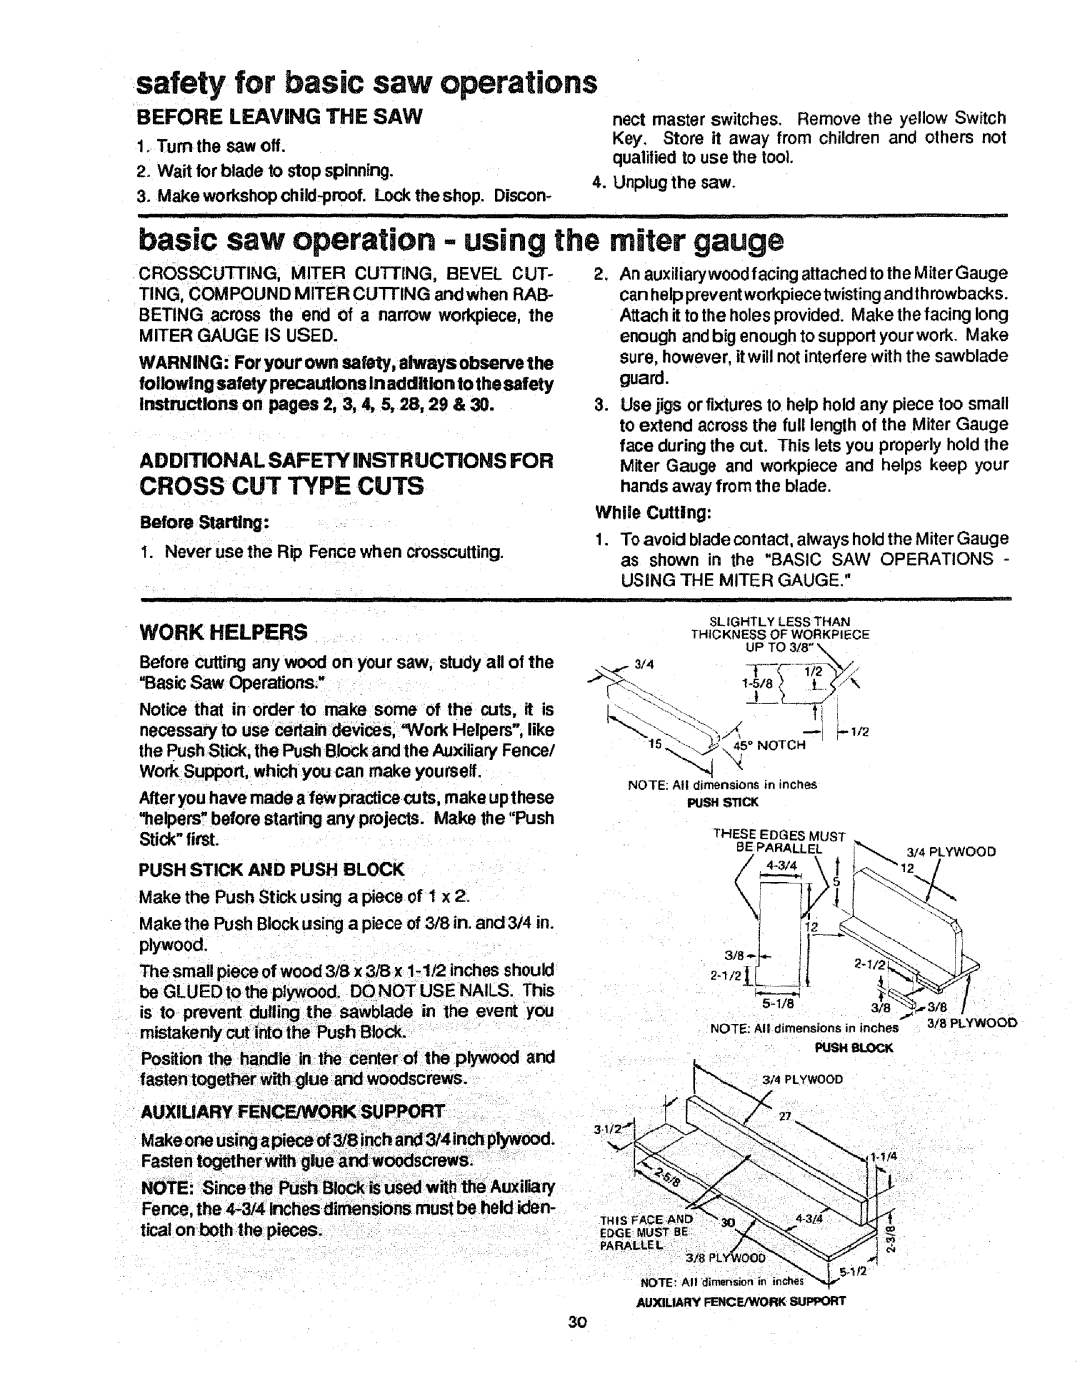 Craftsman 298721 manual safety for basic saw operations, basic saw operation - using the miter gauge, Cross Cut Type Cuts 